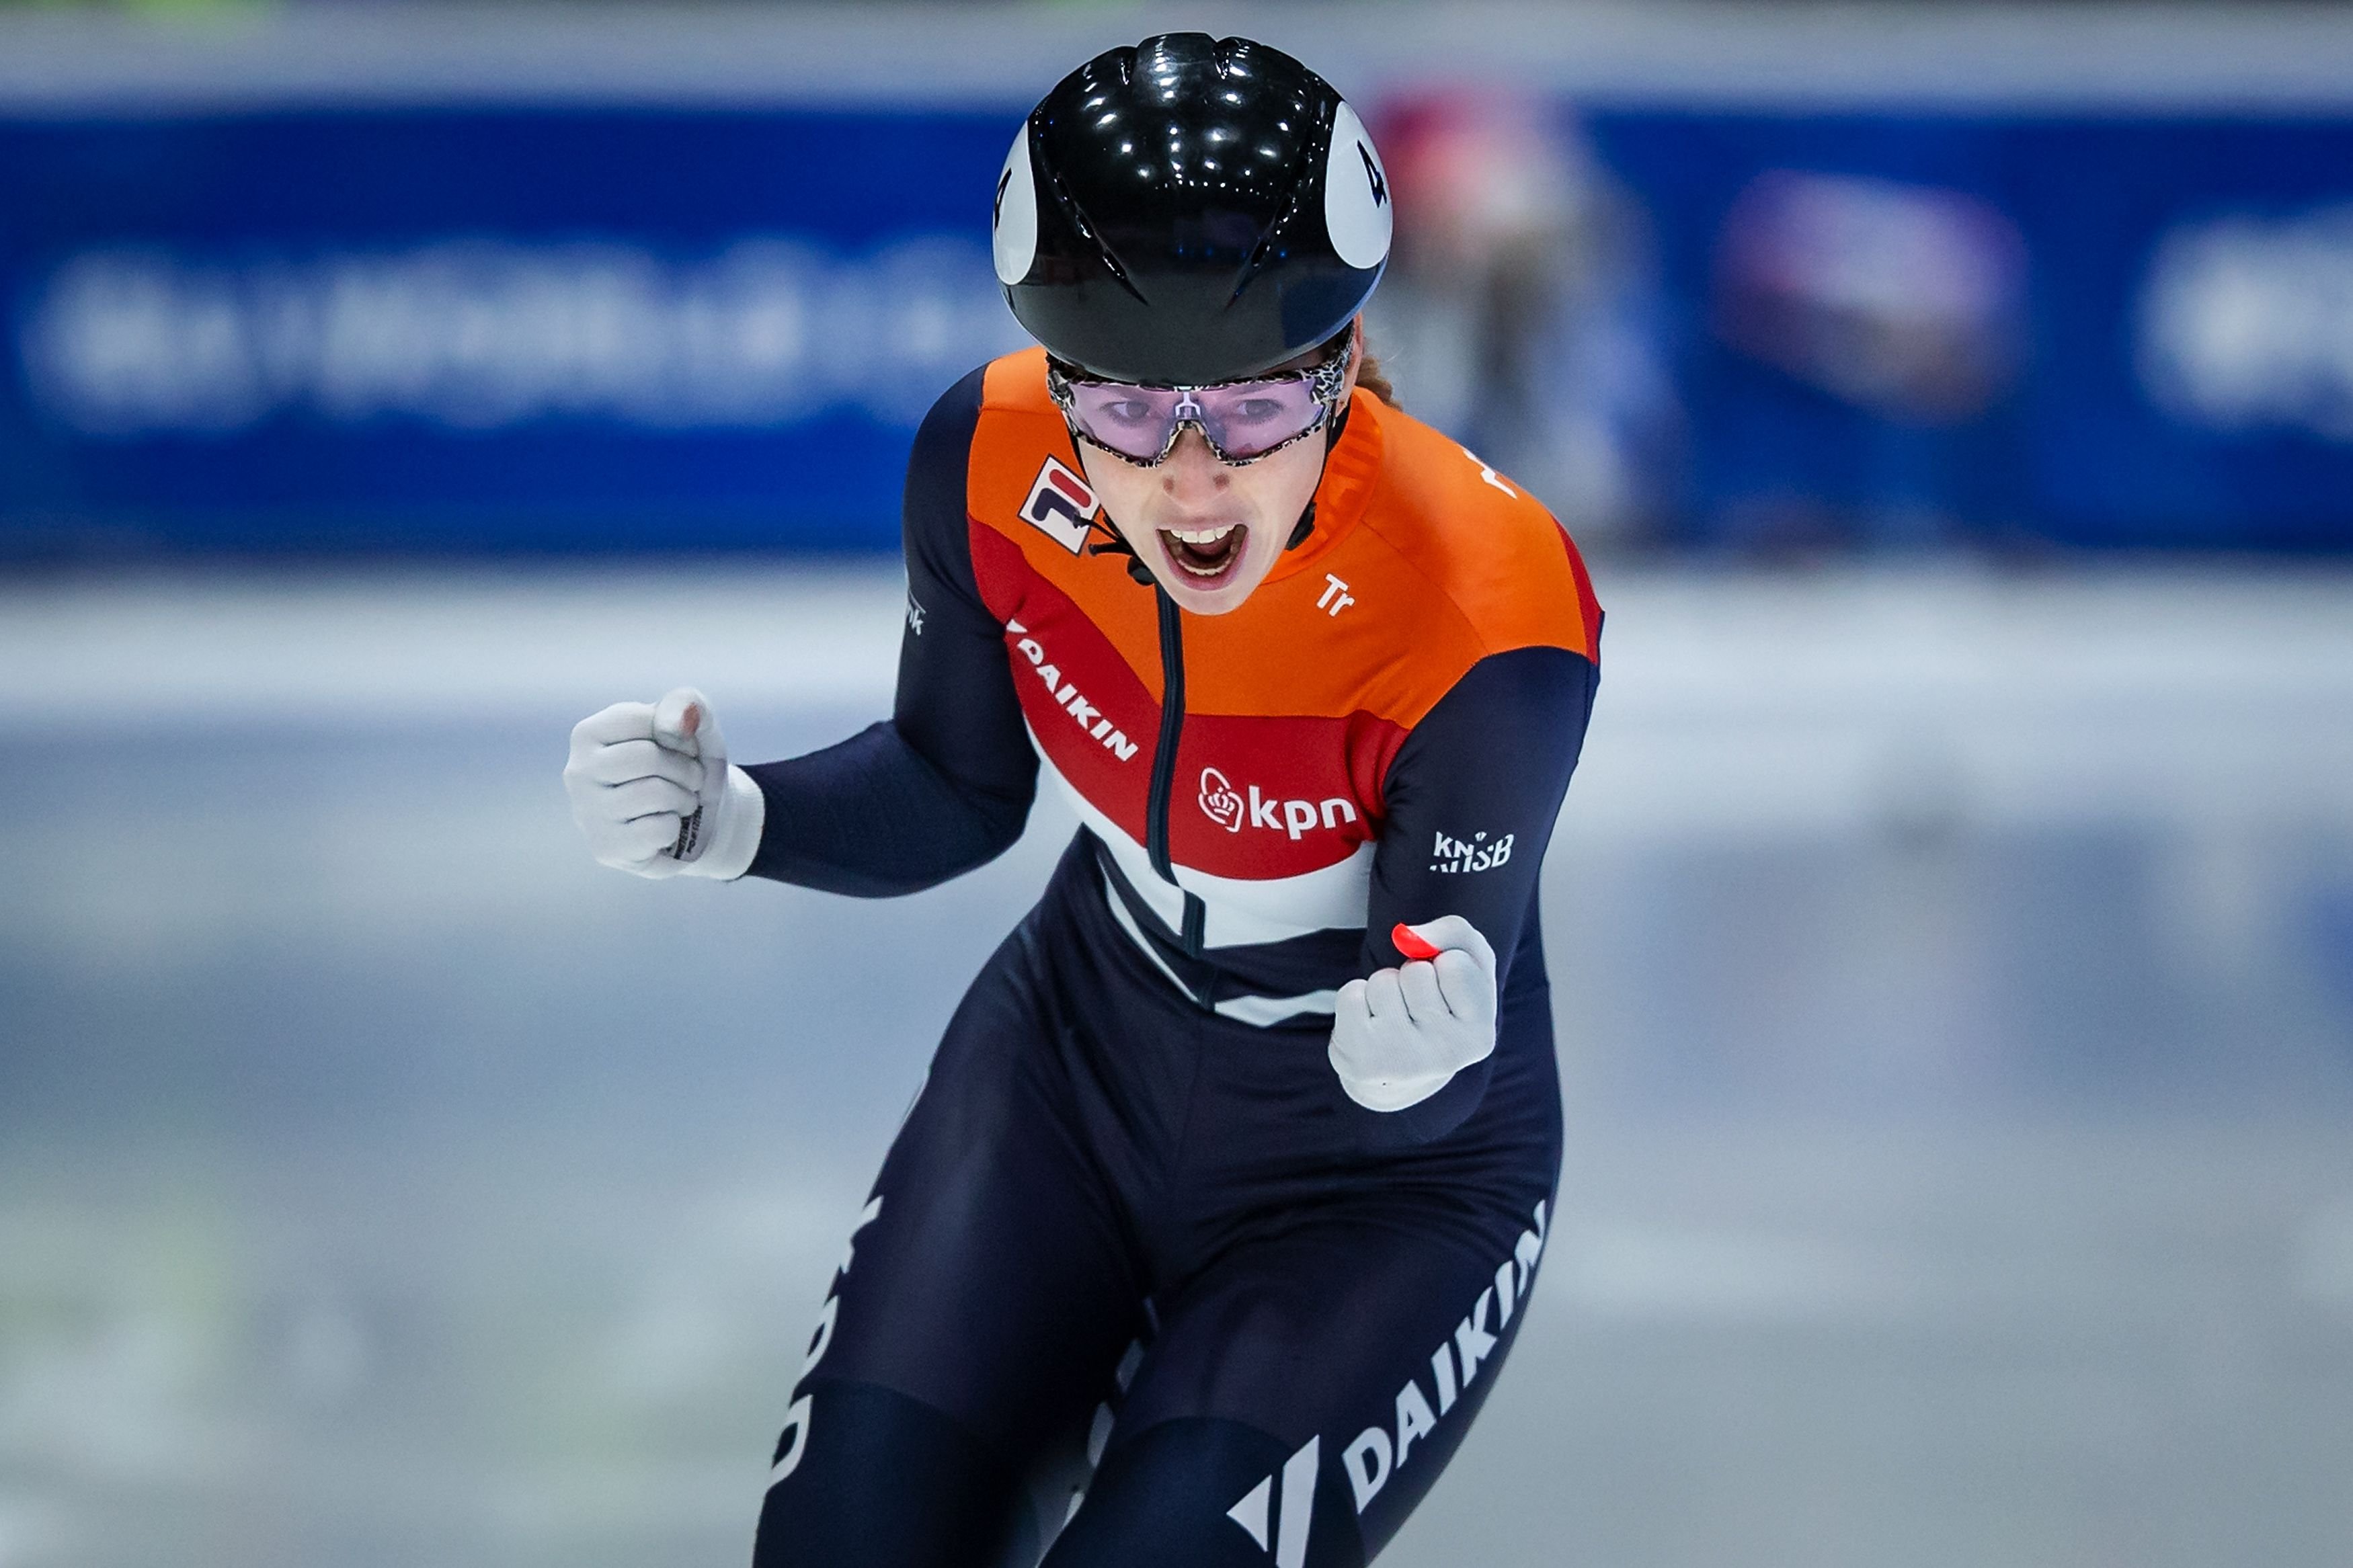 Lara van Ruijven of Netherlands celebrates in the Ladies 500m final during day 2 of the ISU World Cup Short Track at Sportboulevard on February 16, 2020 in Dordrecht, Netherlands | Photo: Getty Images